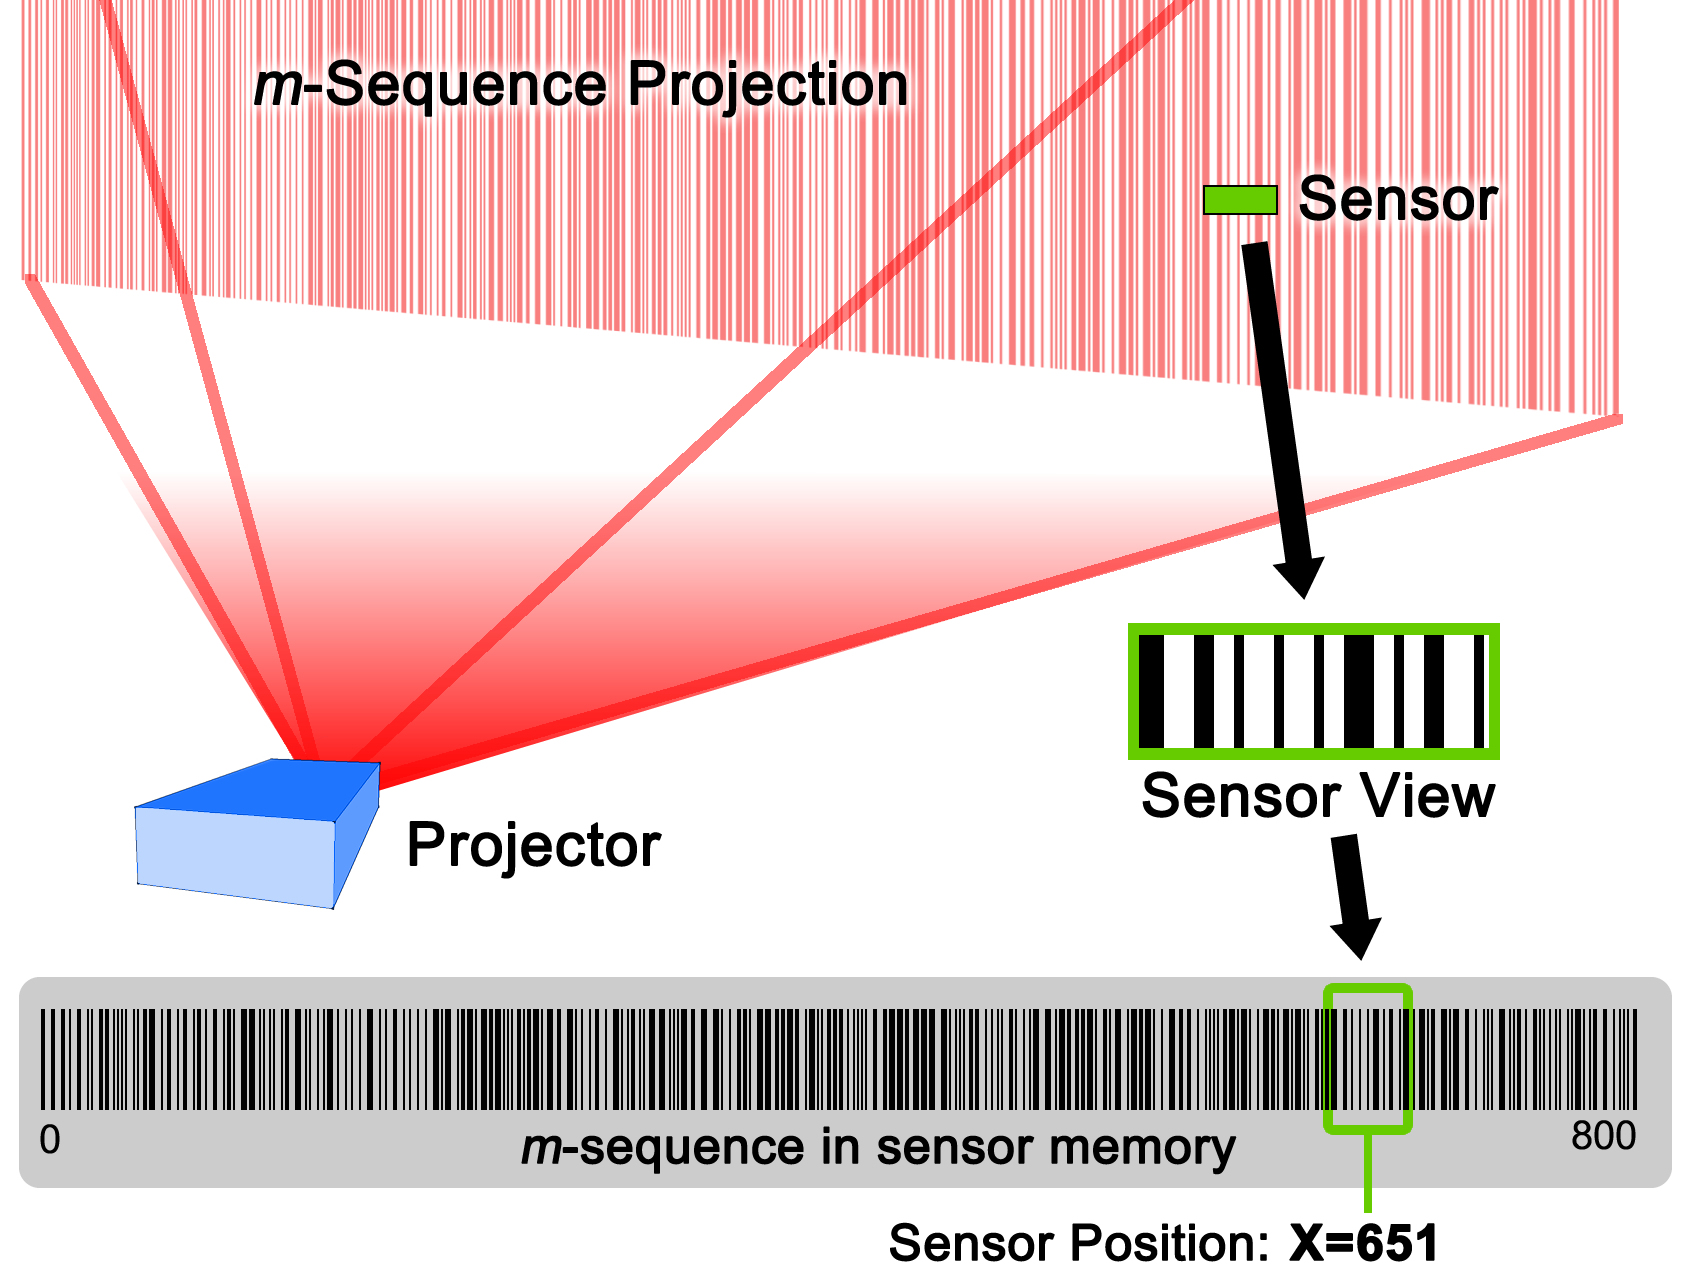 m-sequence projection